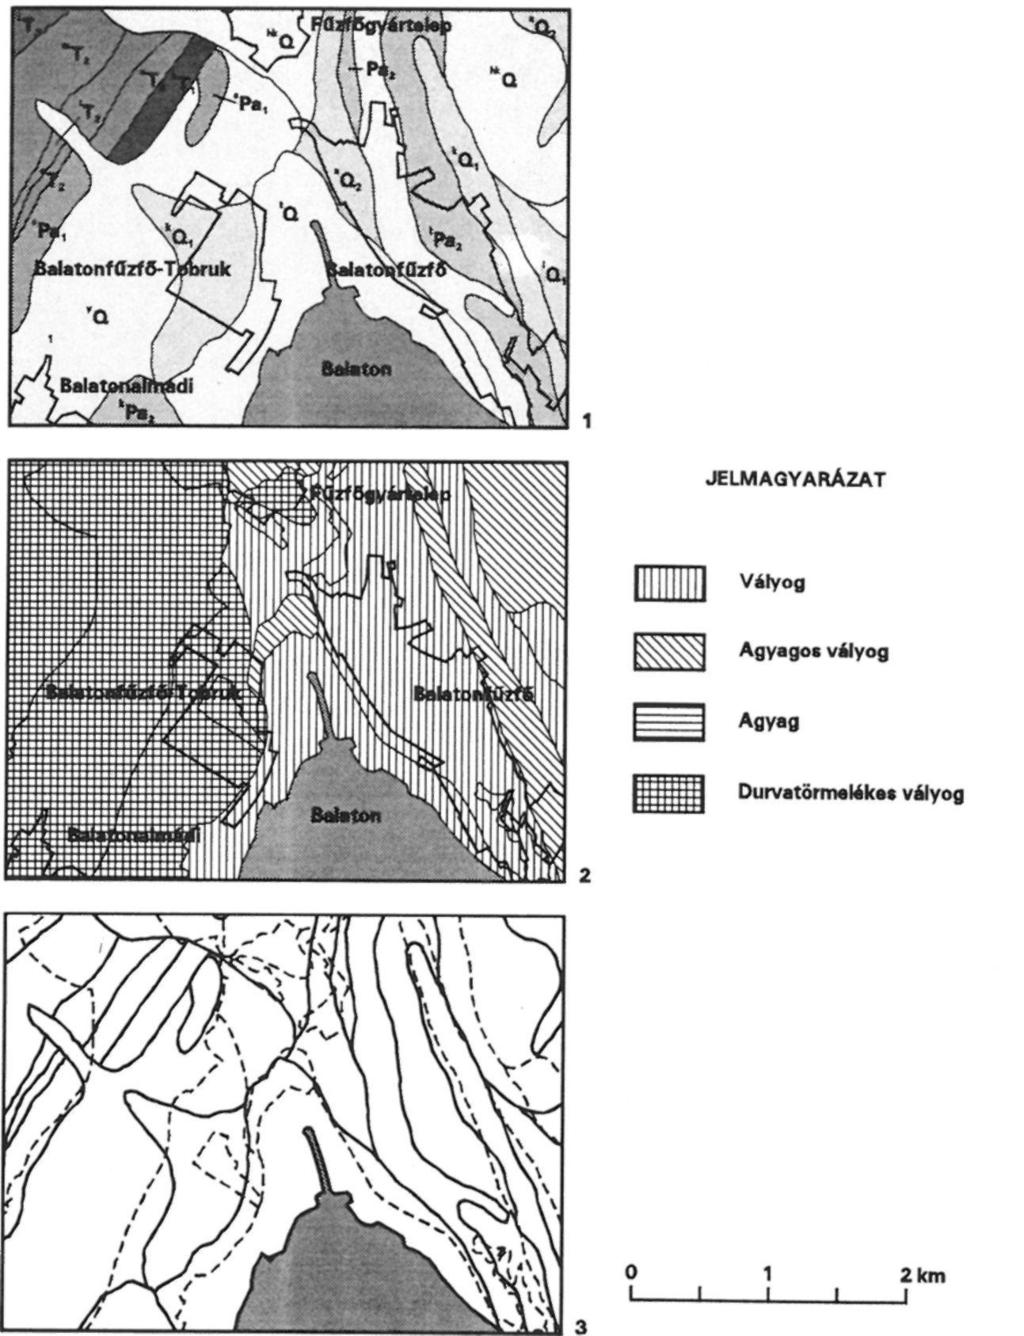 Parts of digital reconstruction of engineering geological map series on recreation area of Lake Balaton (CHIKÁNNÉ & ERDÉLYI, 1989).